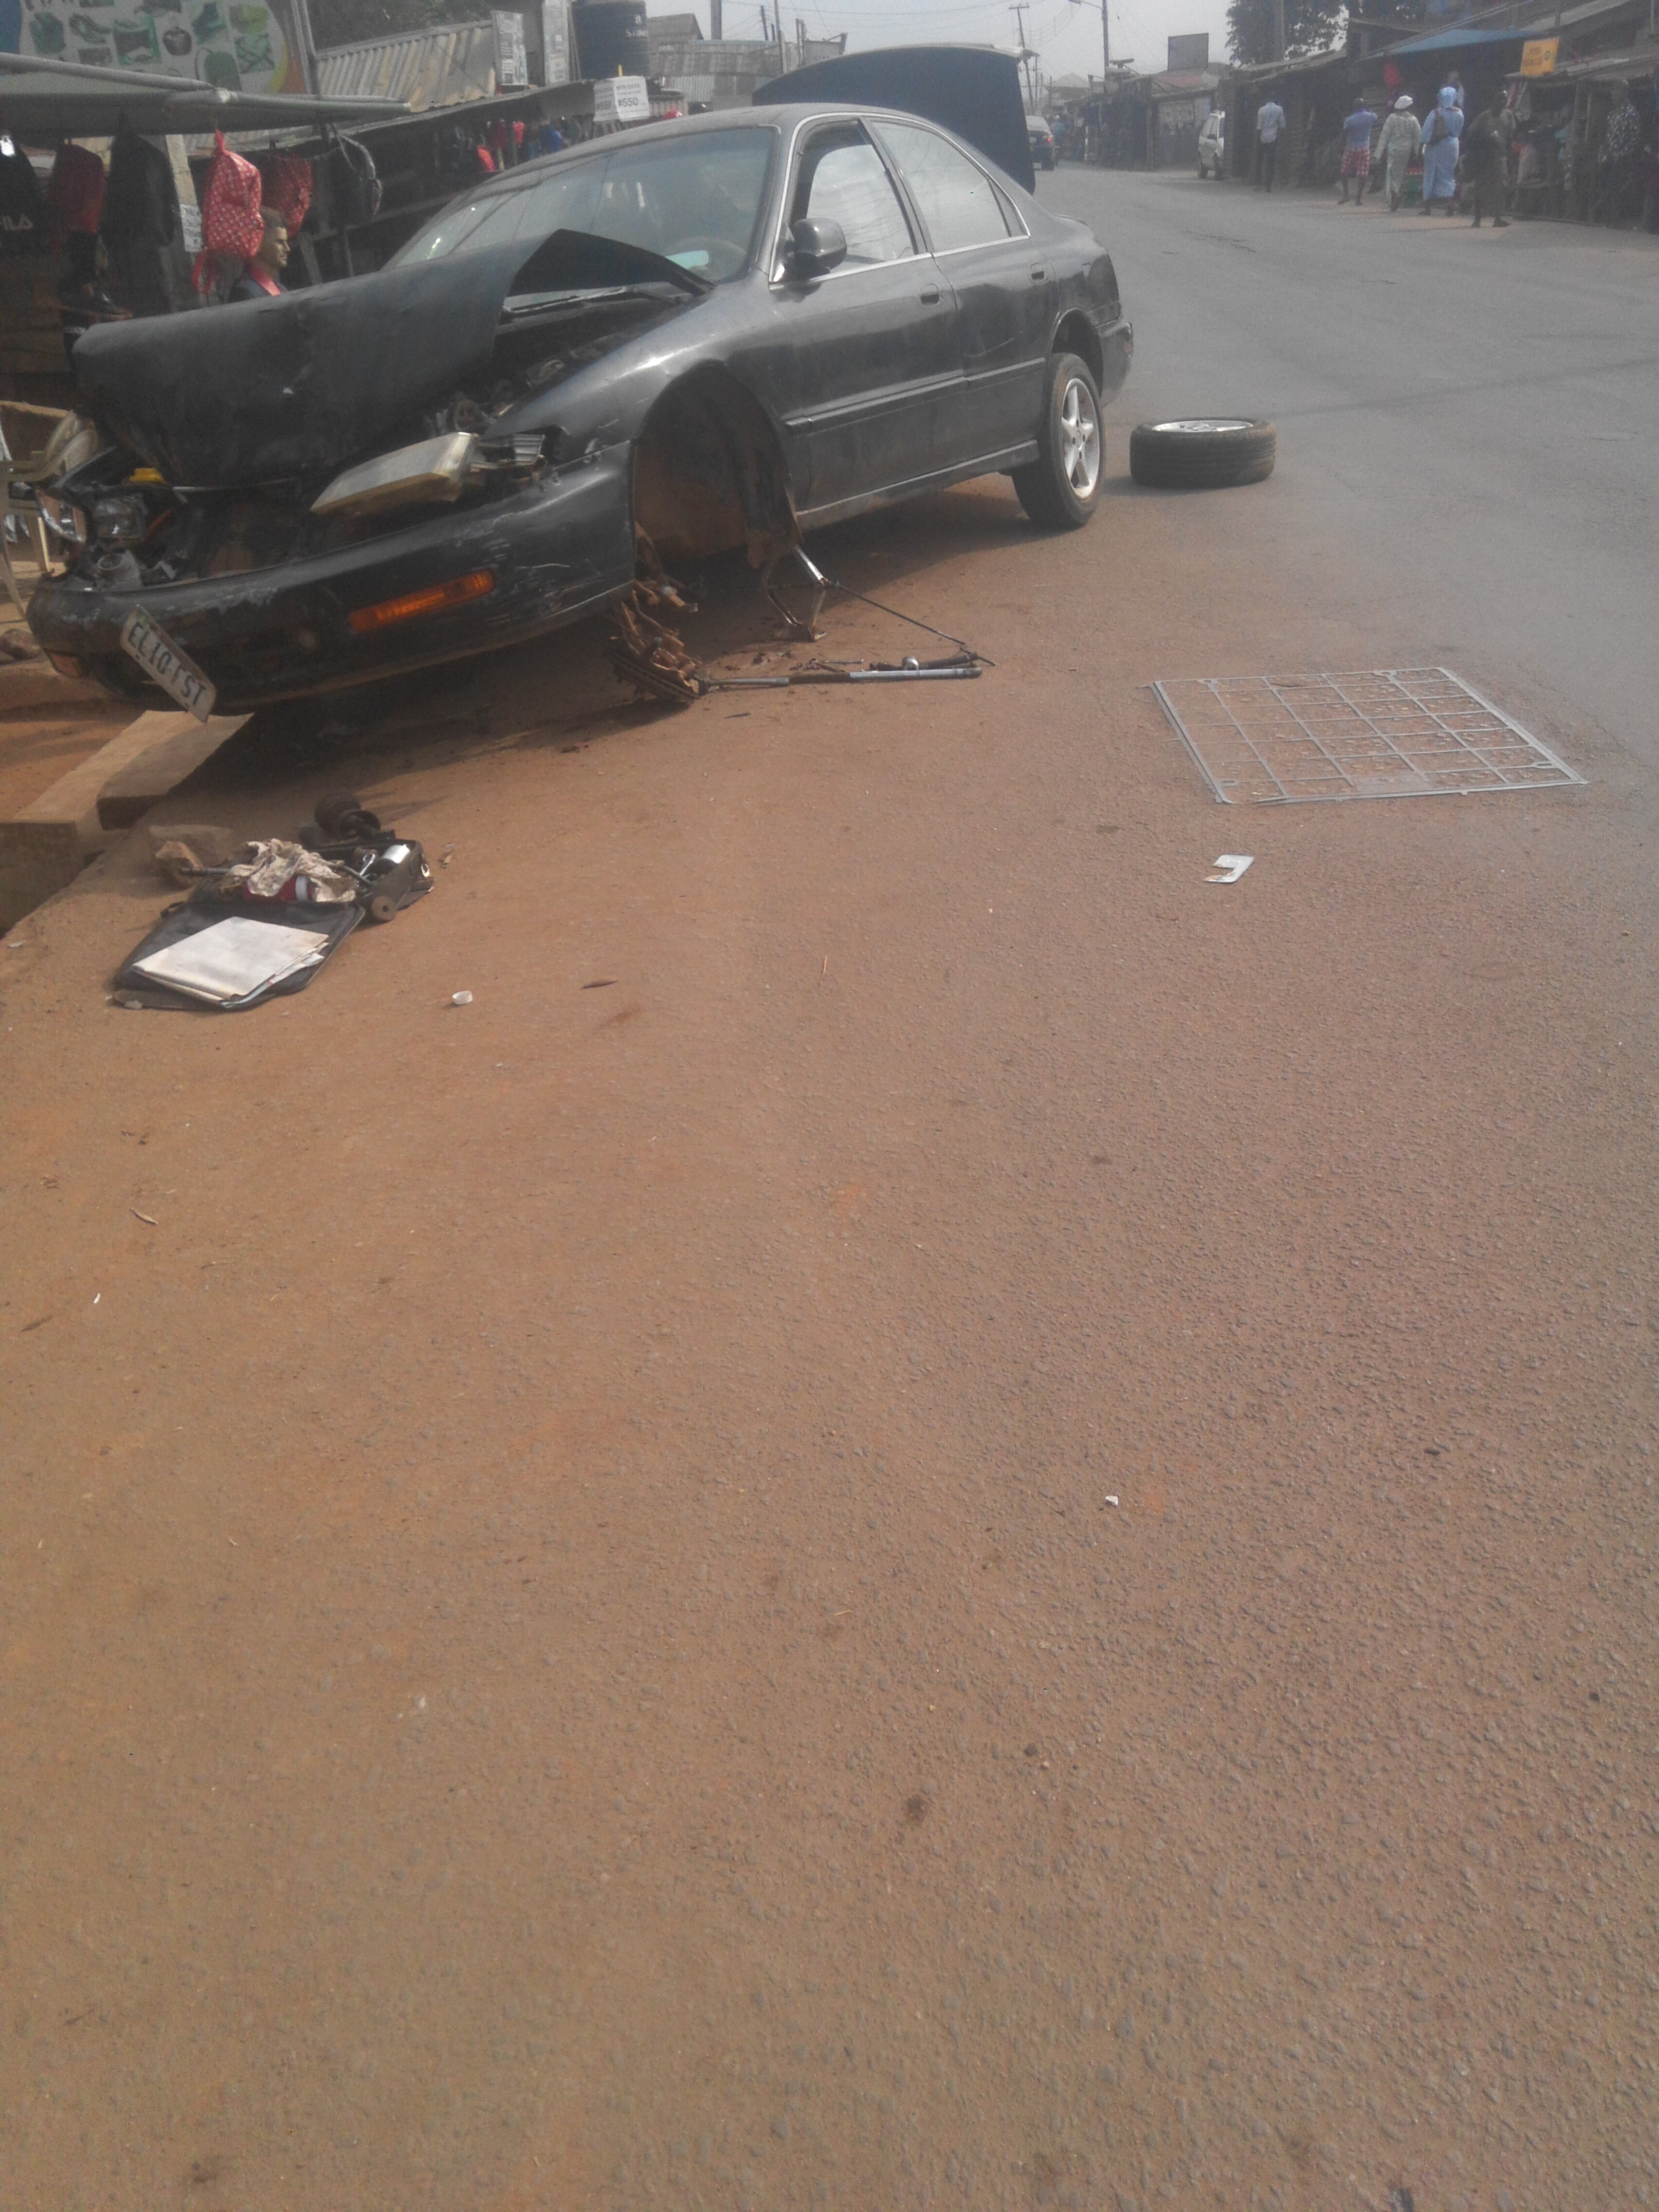 7 Escape Death In Ife Car Accident